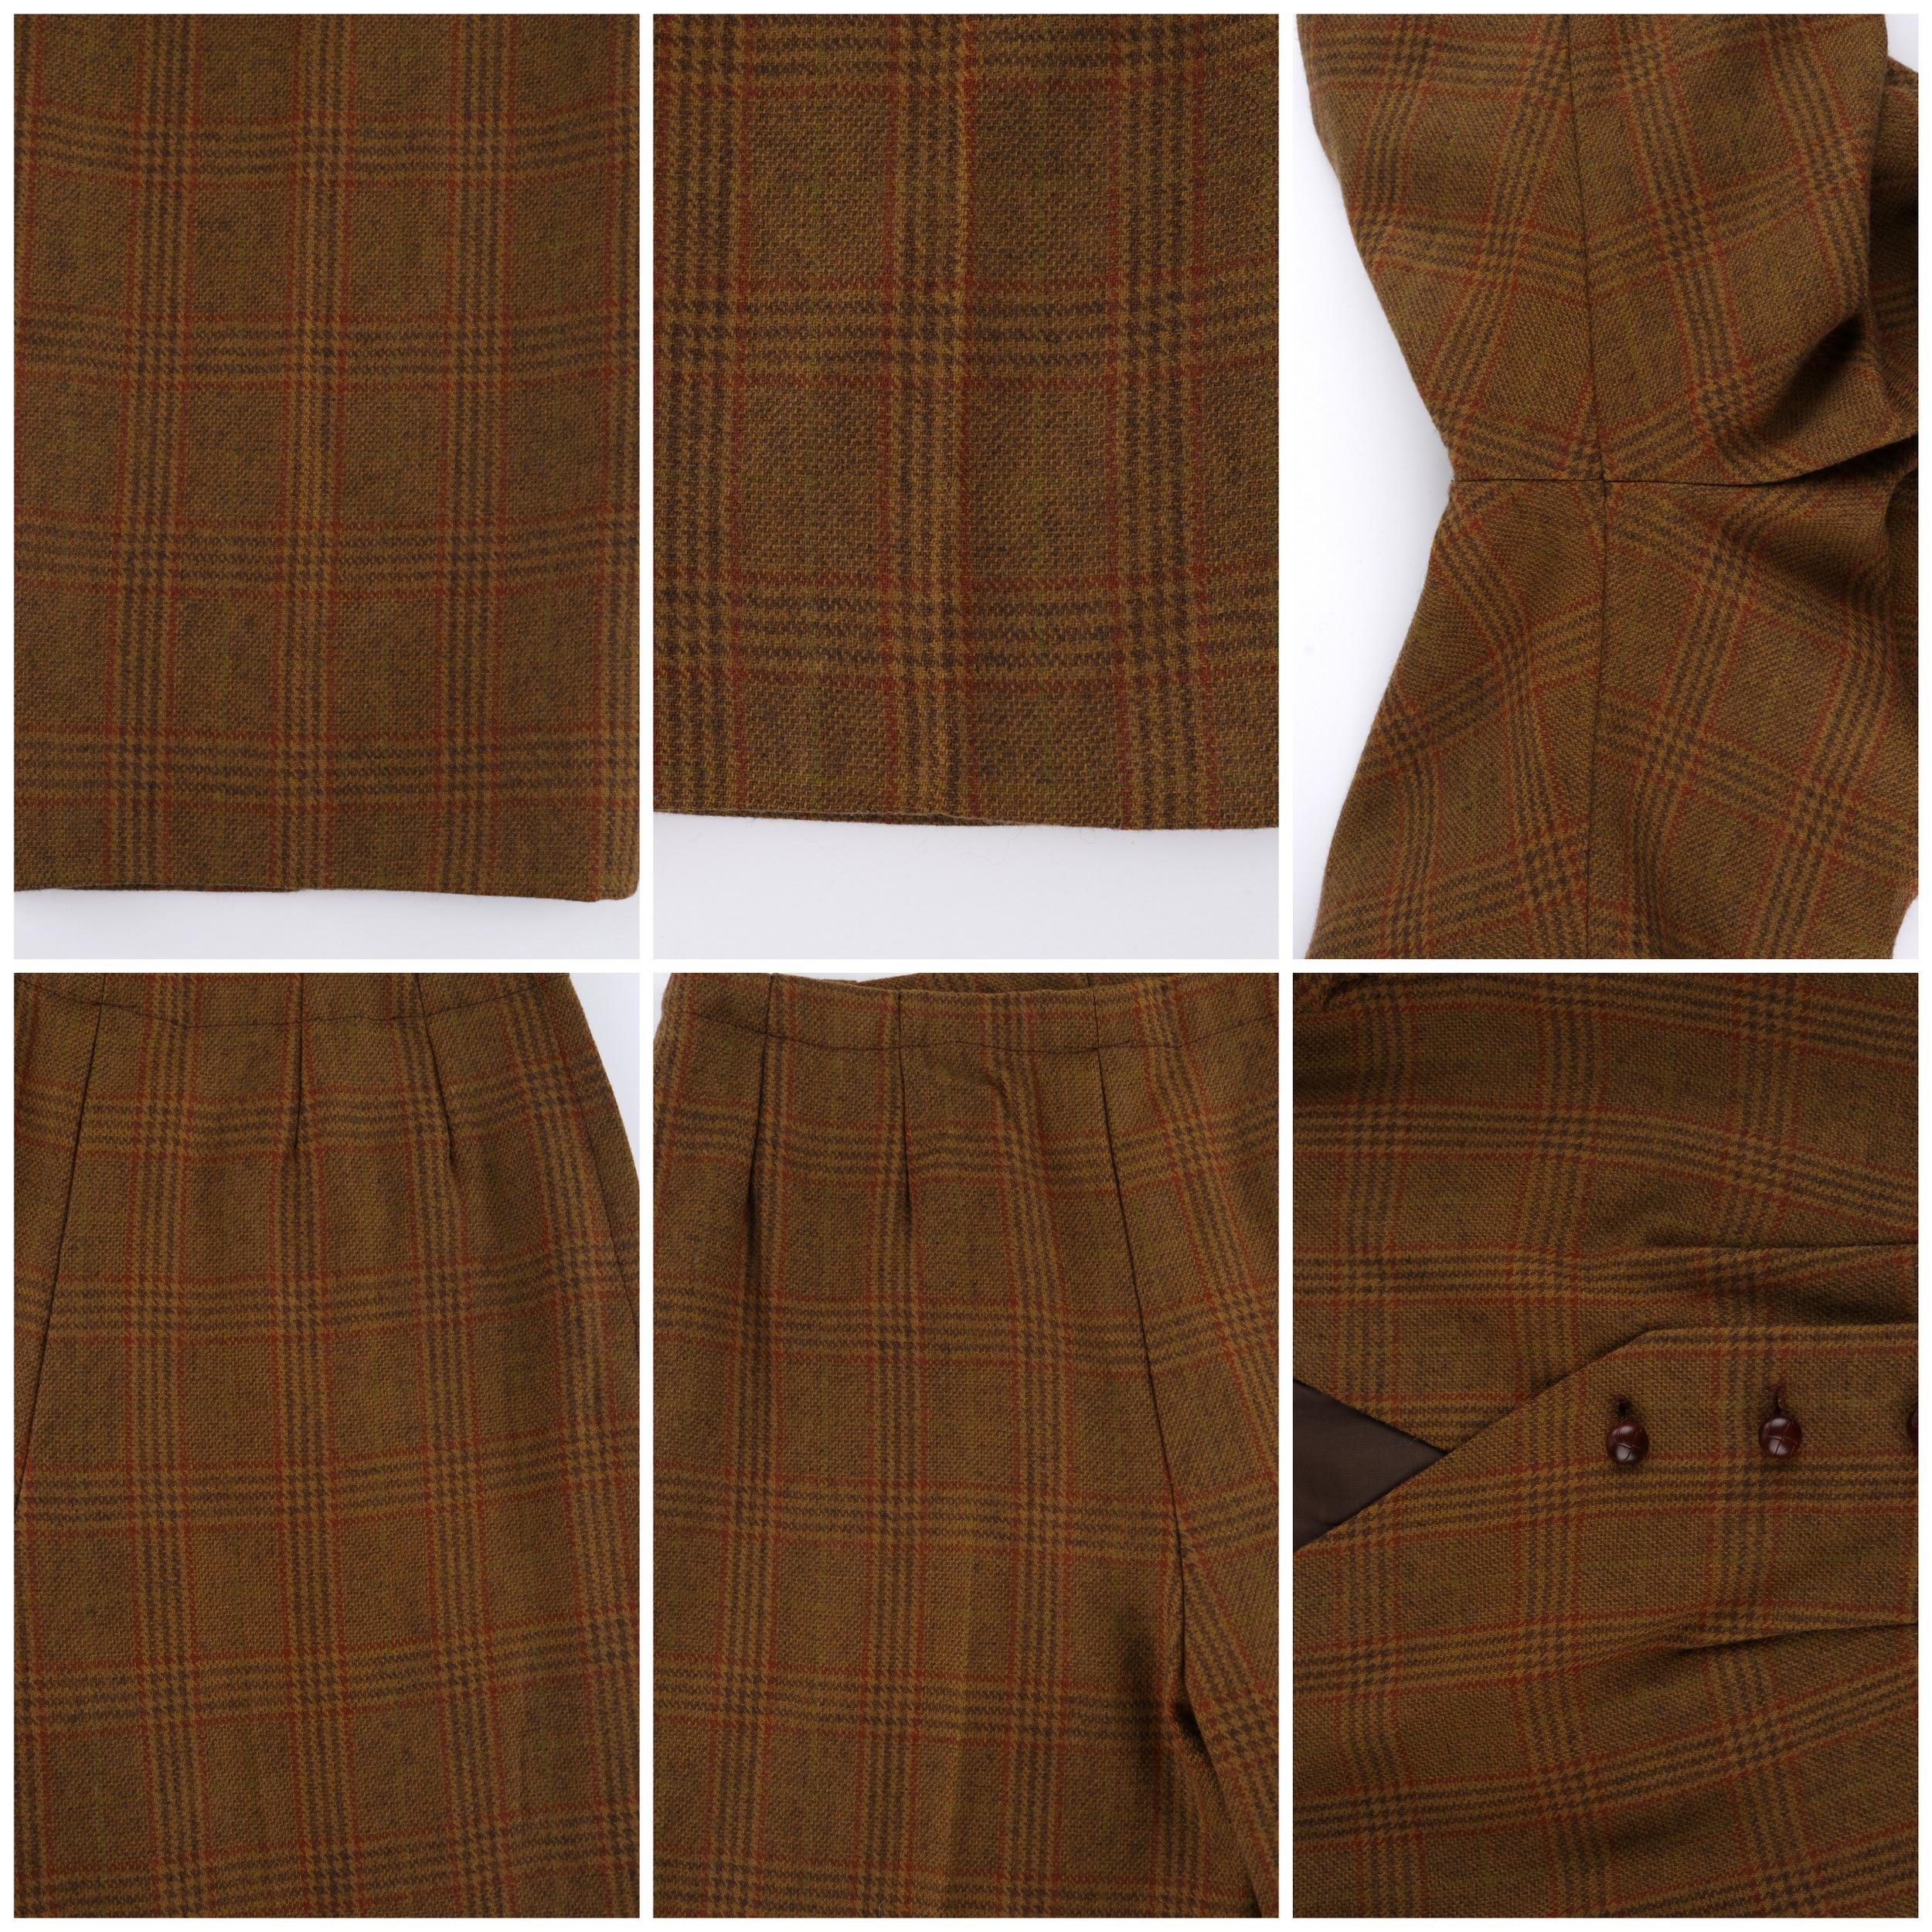 c.1930’s COUTURE 2 Pc Brown Wool Tweed Check Balloon Sleeve Jacket Pant Suit Set 4